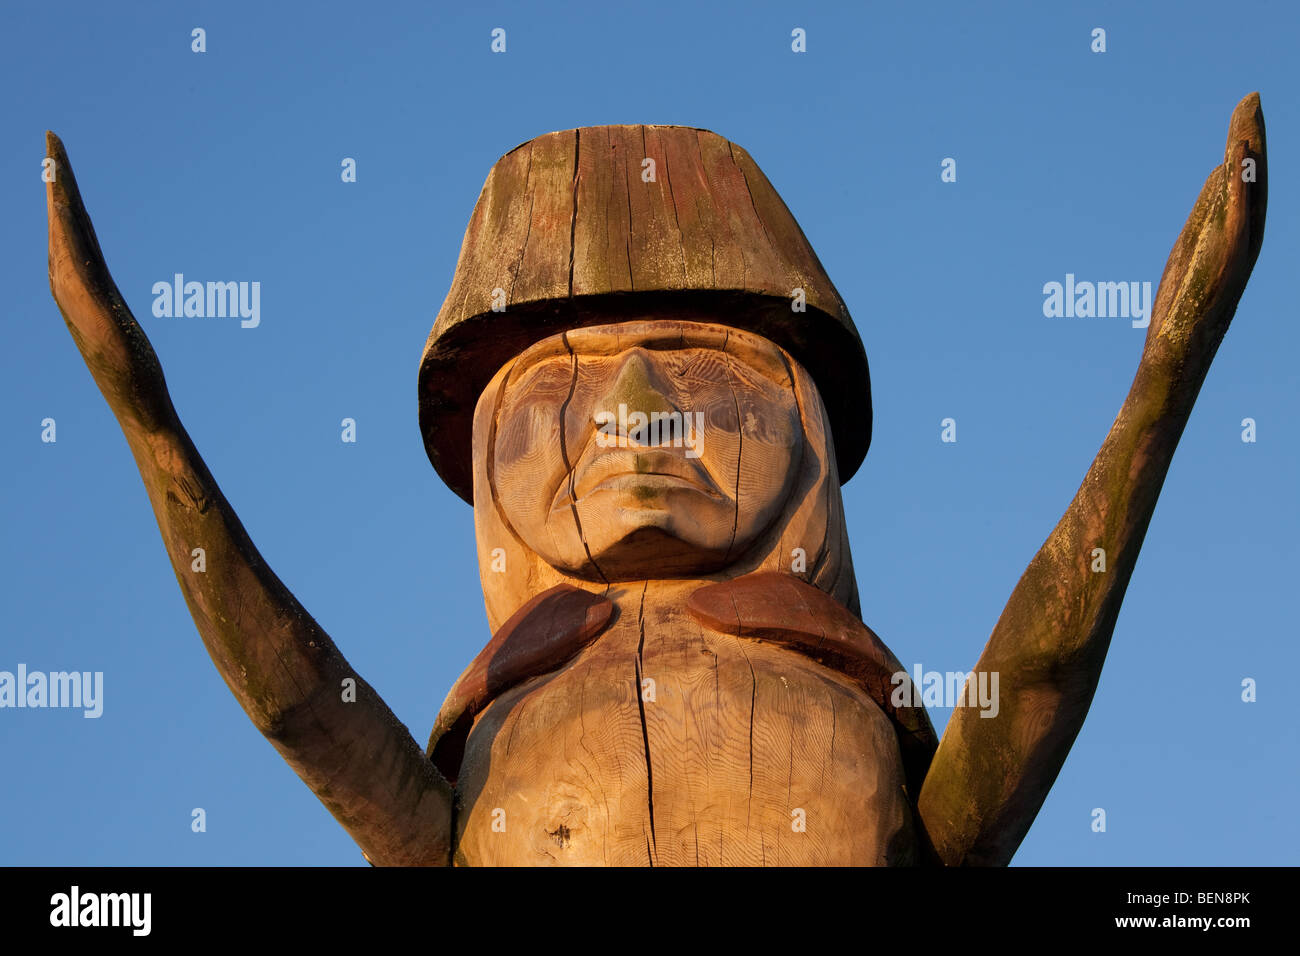 Welcoming totem in Vancouver Stock Photo